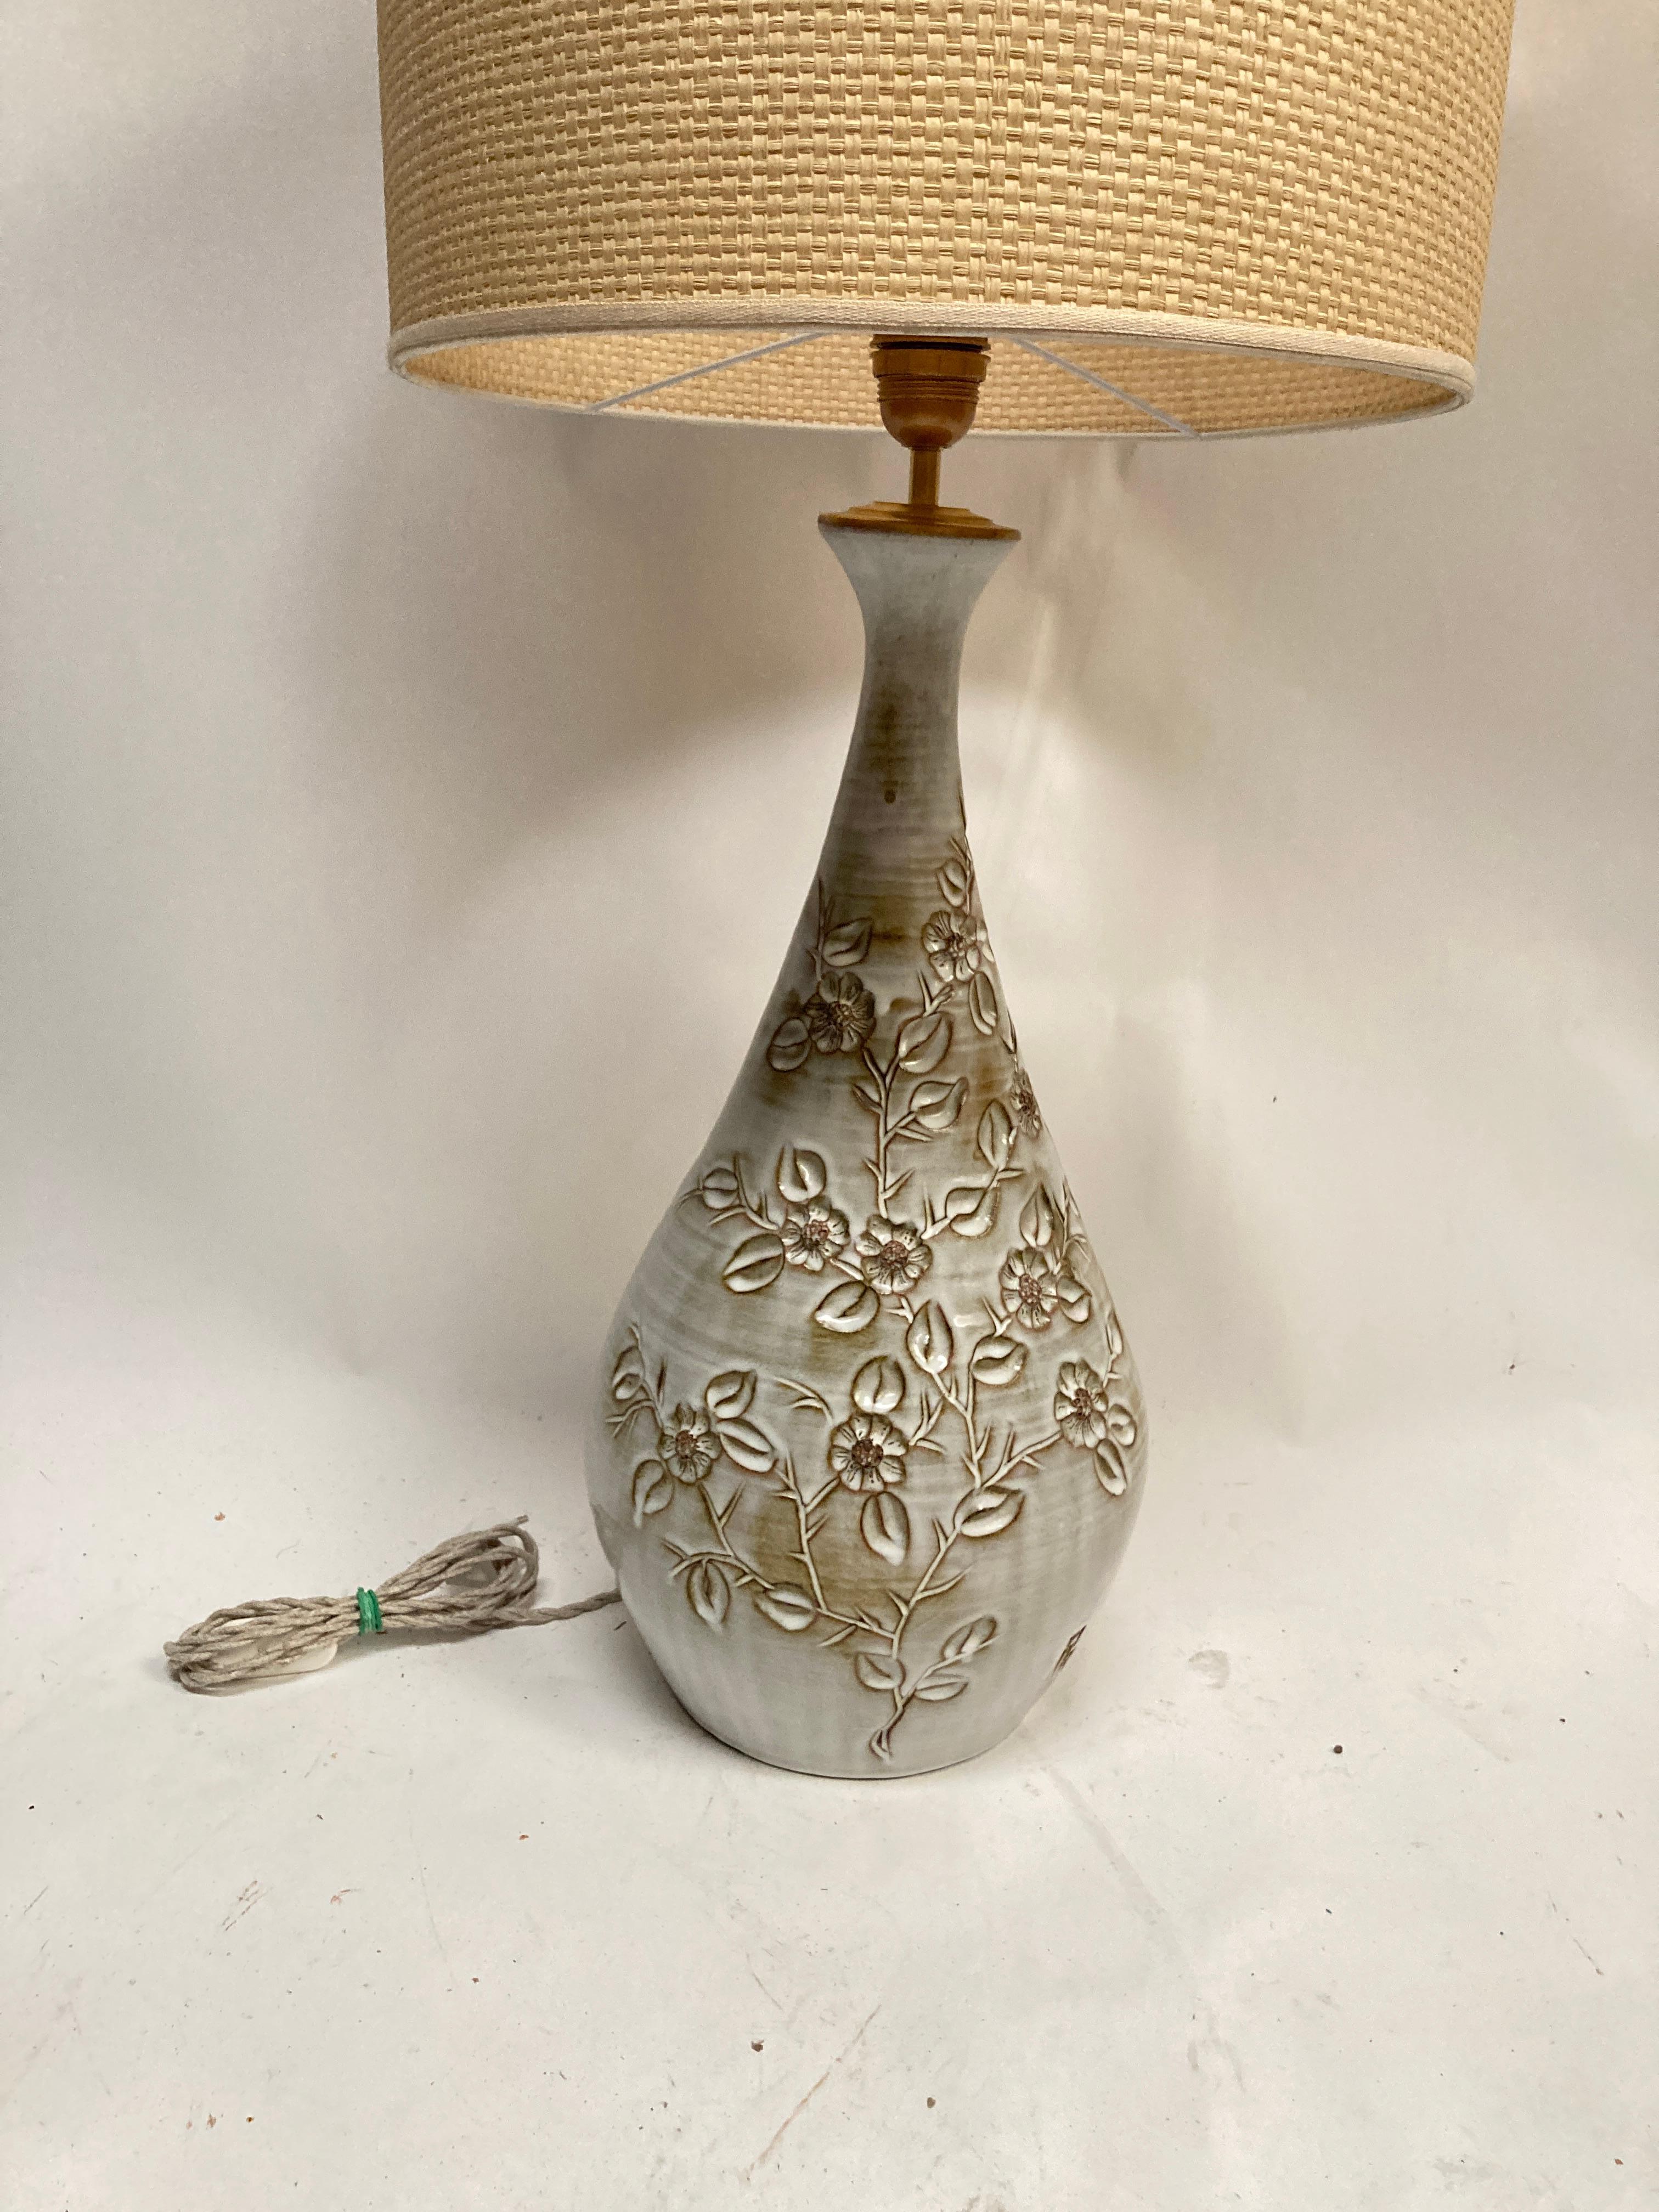 Very nice 1970's one of a kind Studio pottery lamp
Vallauris
France
Dimensions given without shade
No shade included